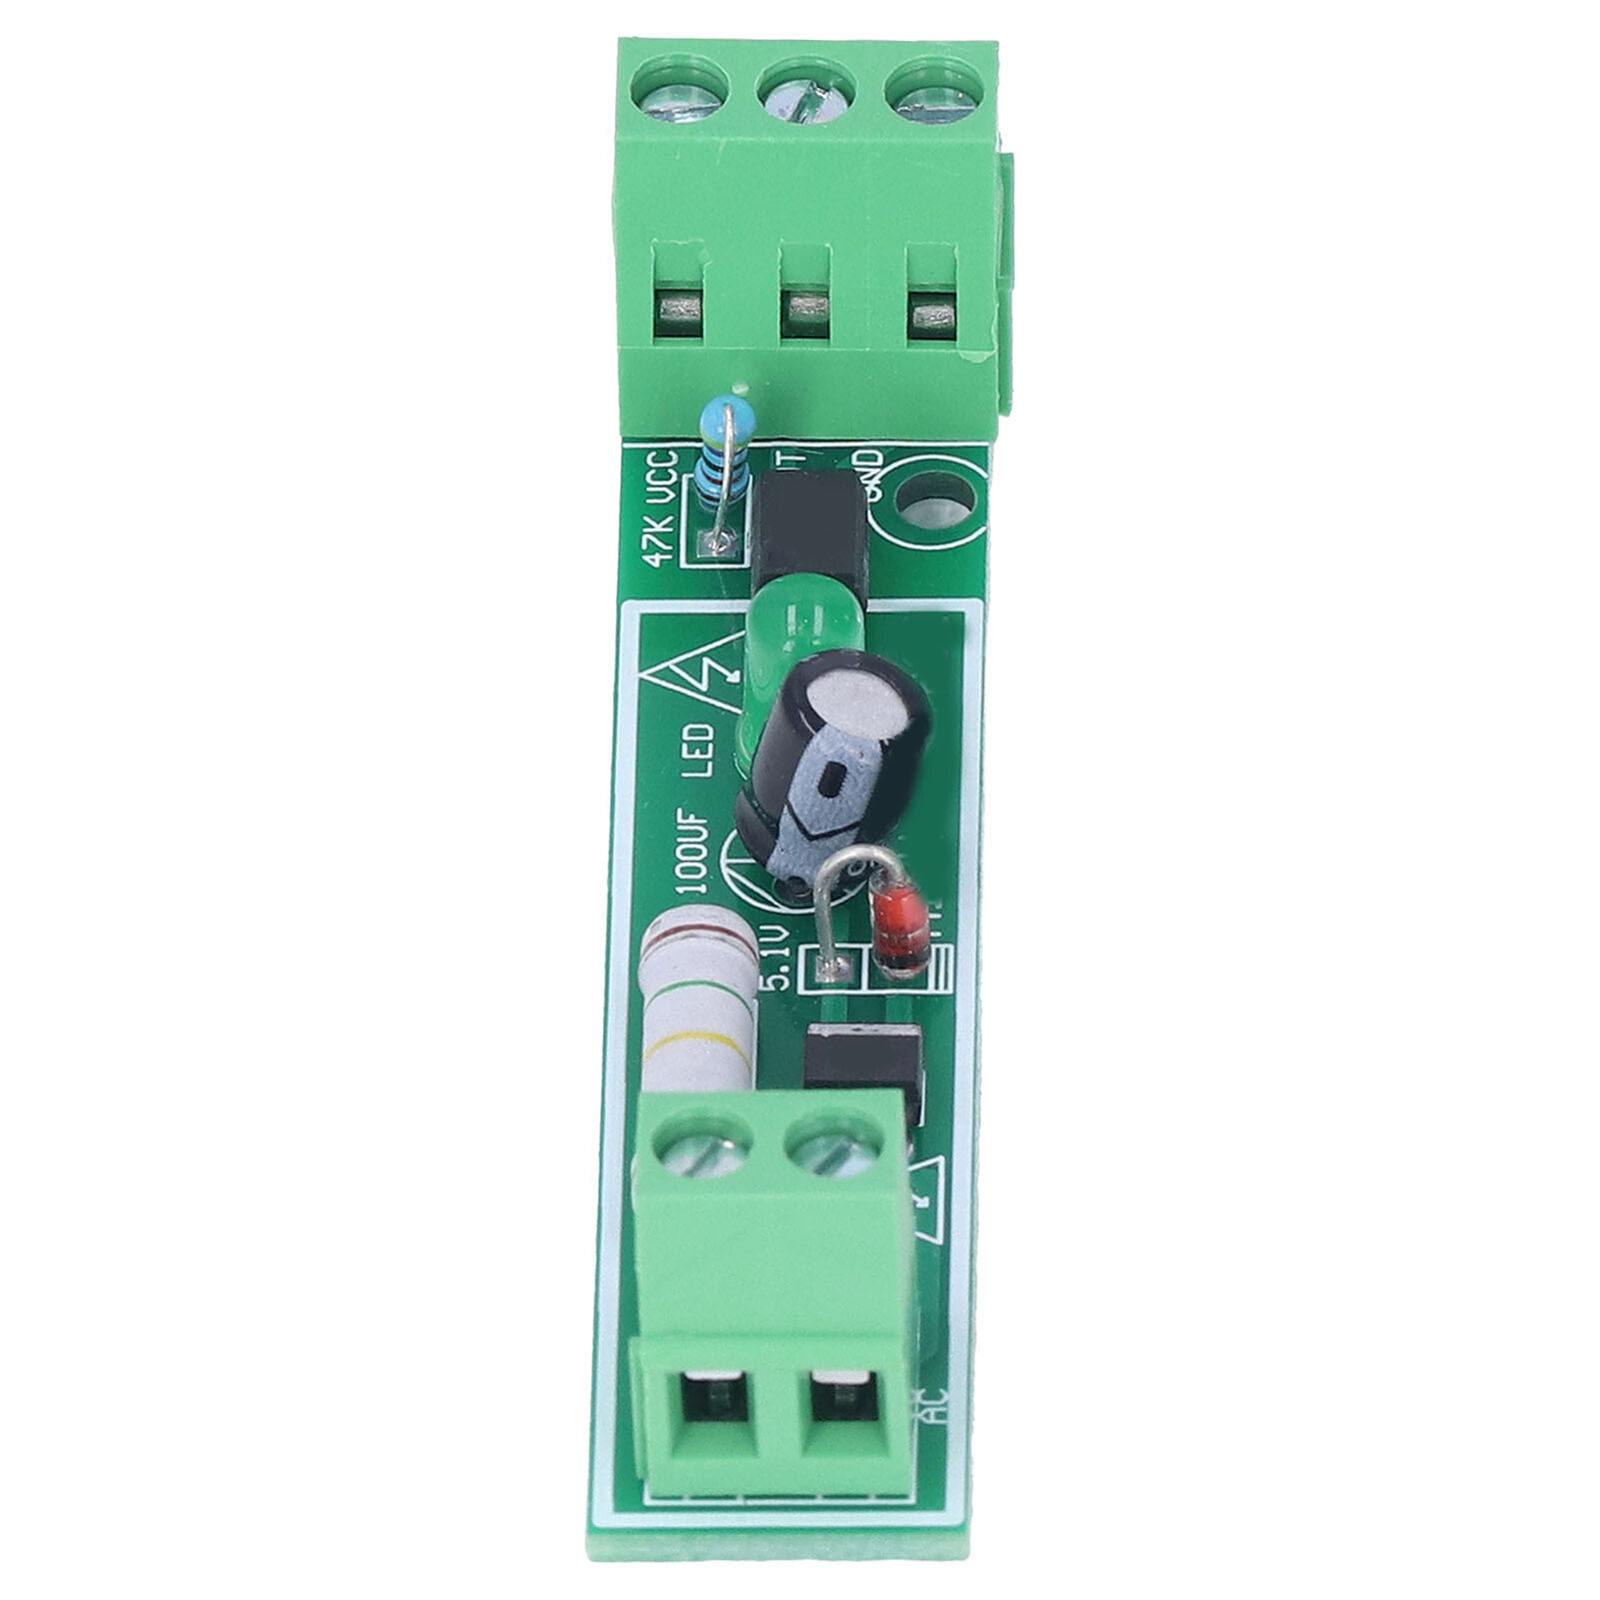 Opto Isolator Module 1-Channel Optocoupler Isolation Board Voltage Detection PLC